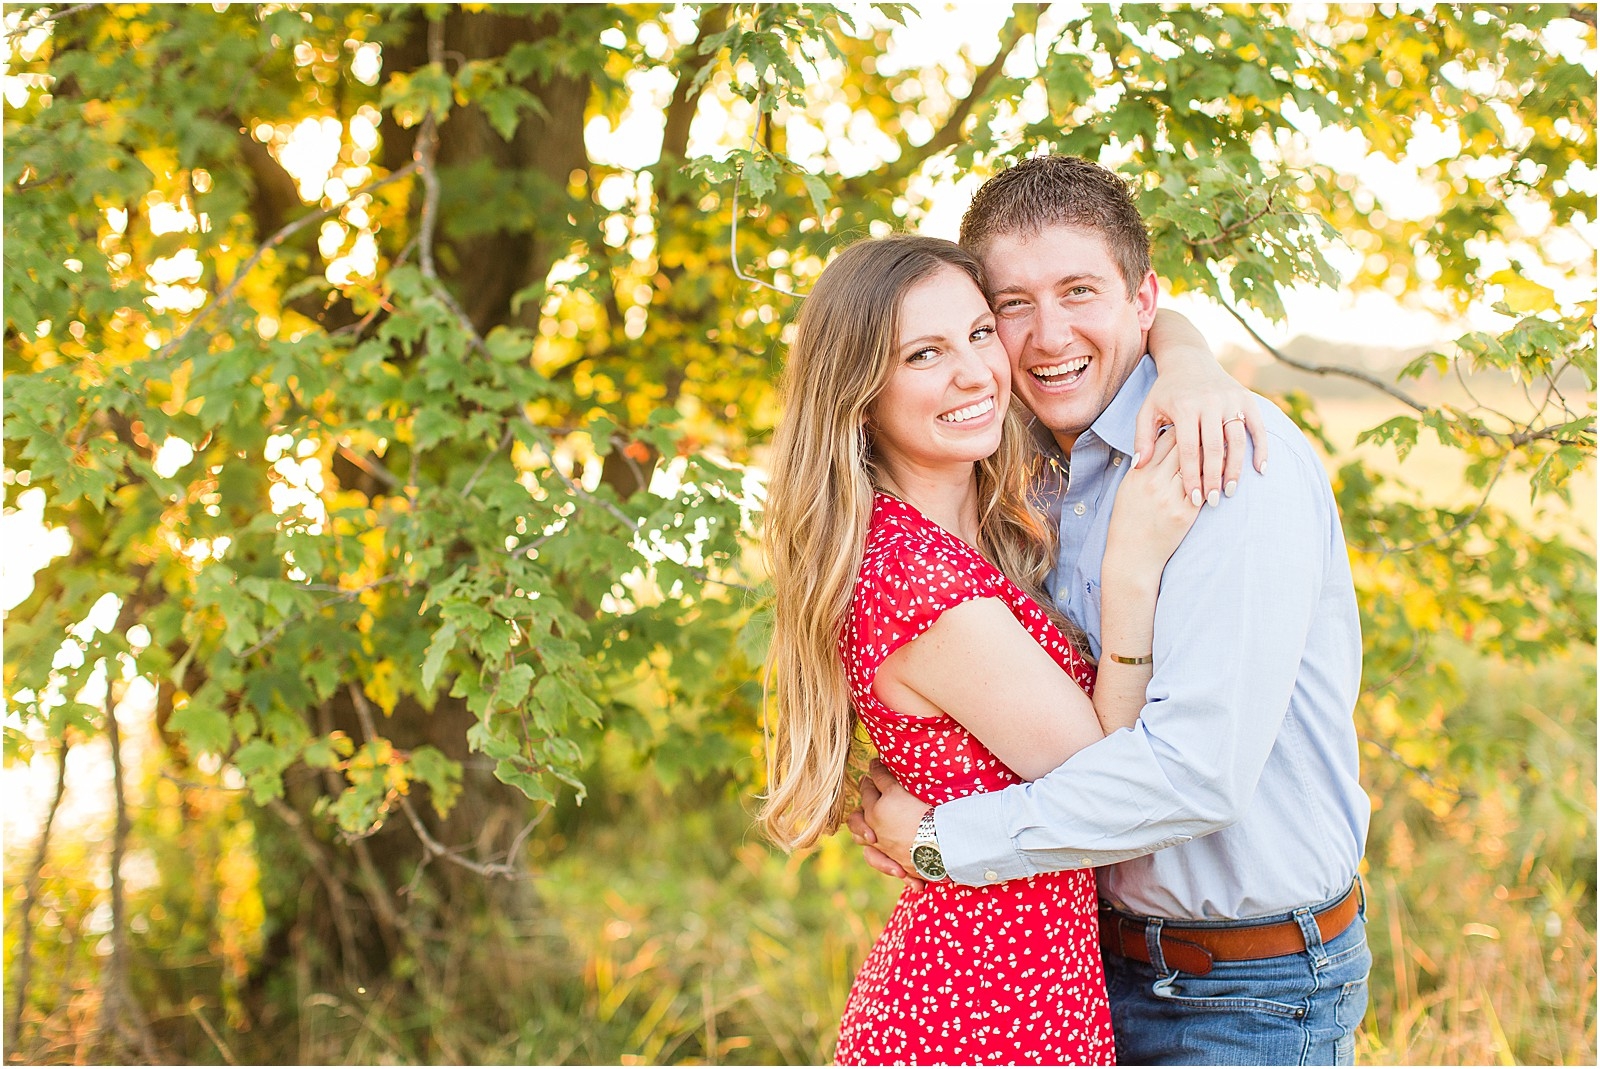 A Jasper Indiana Engagement Session | Tori and Kyle | Bret and Brandie Photography038.jpg